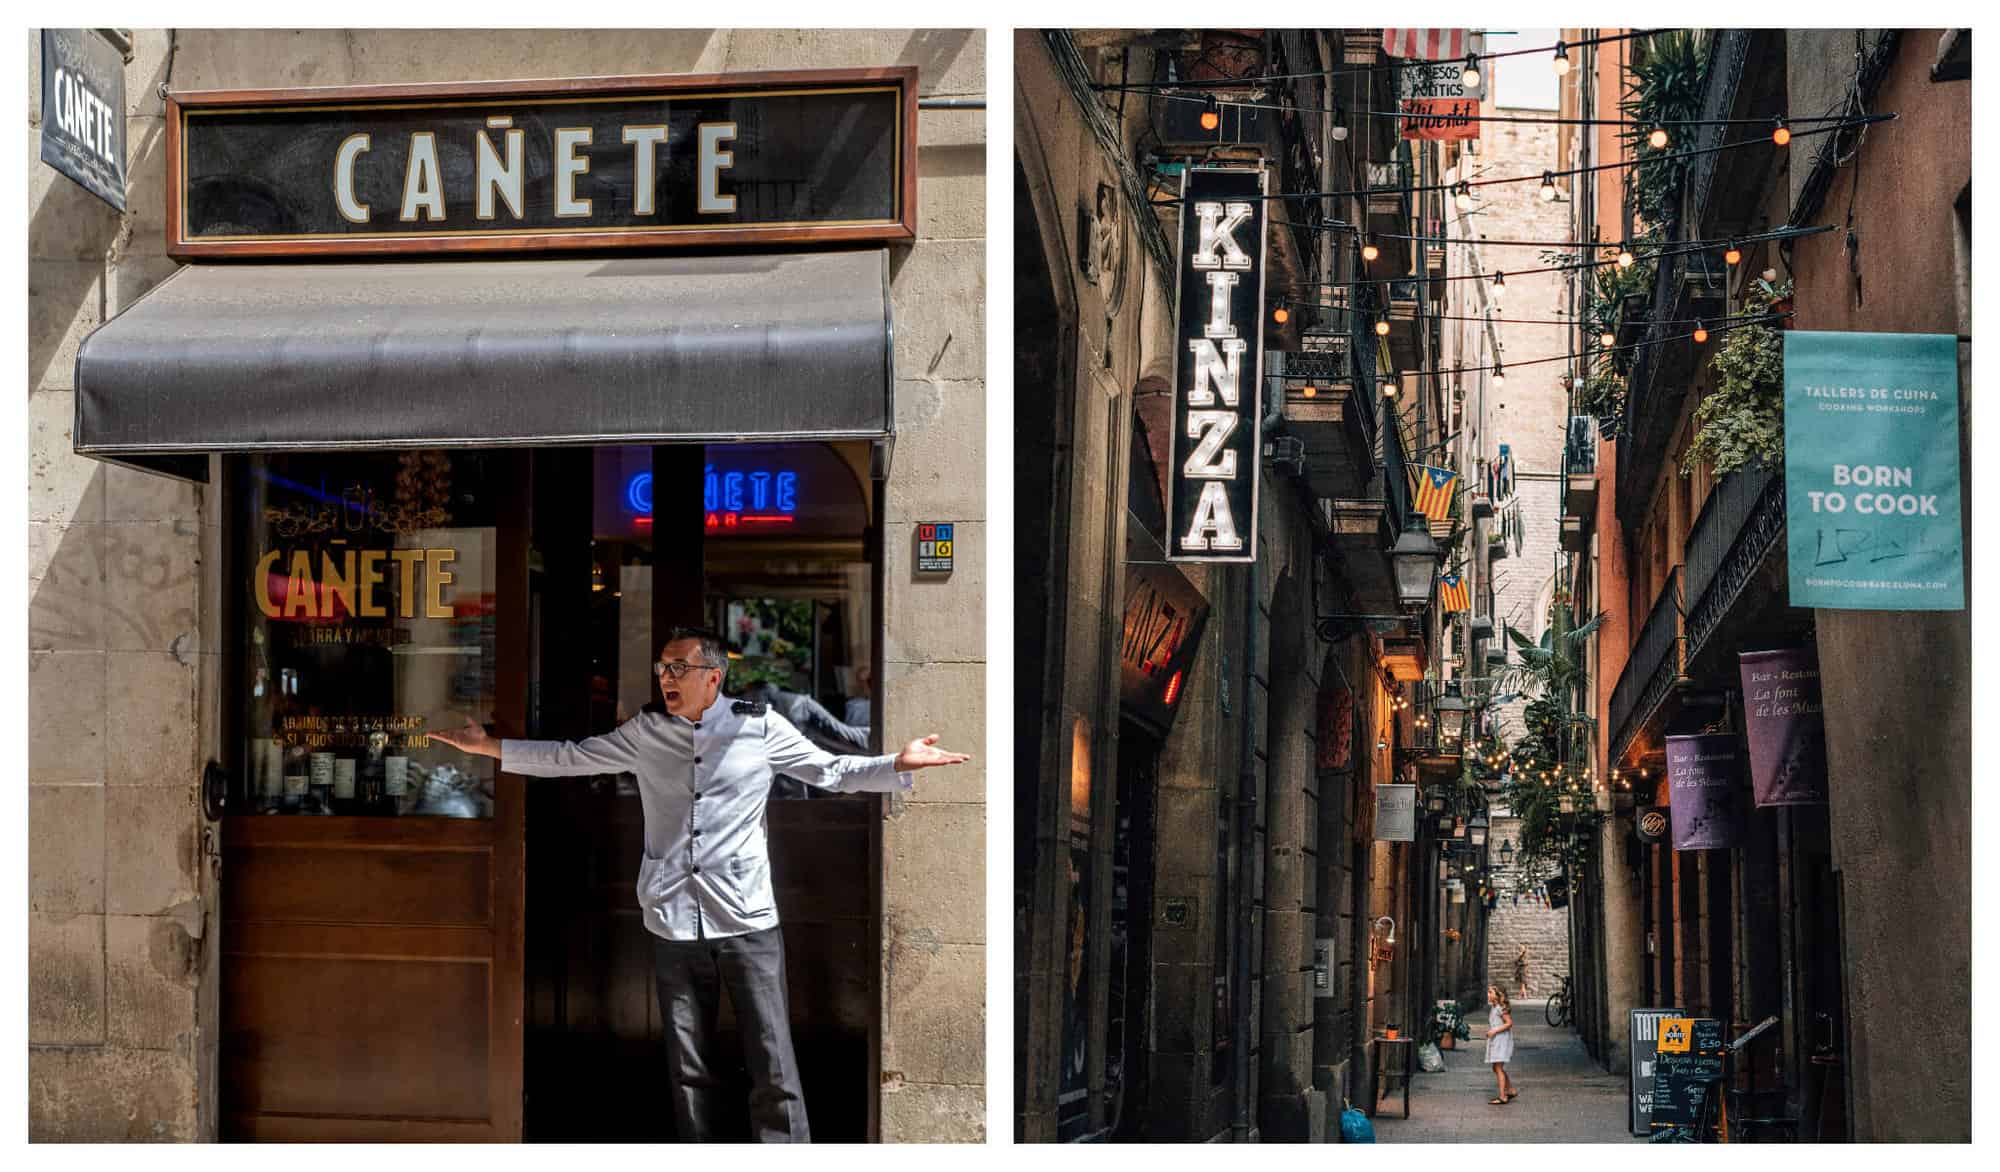 Left: The entrance of Canete restaurant in Barcelona, with wooden doors and black finishing. Right: A young girl walks through a narrow Barcelona street with fairy lights.